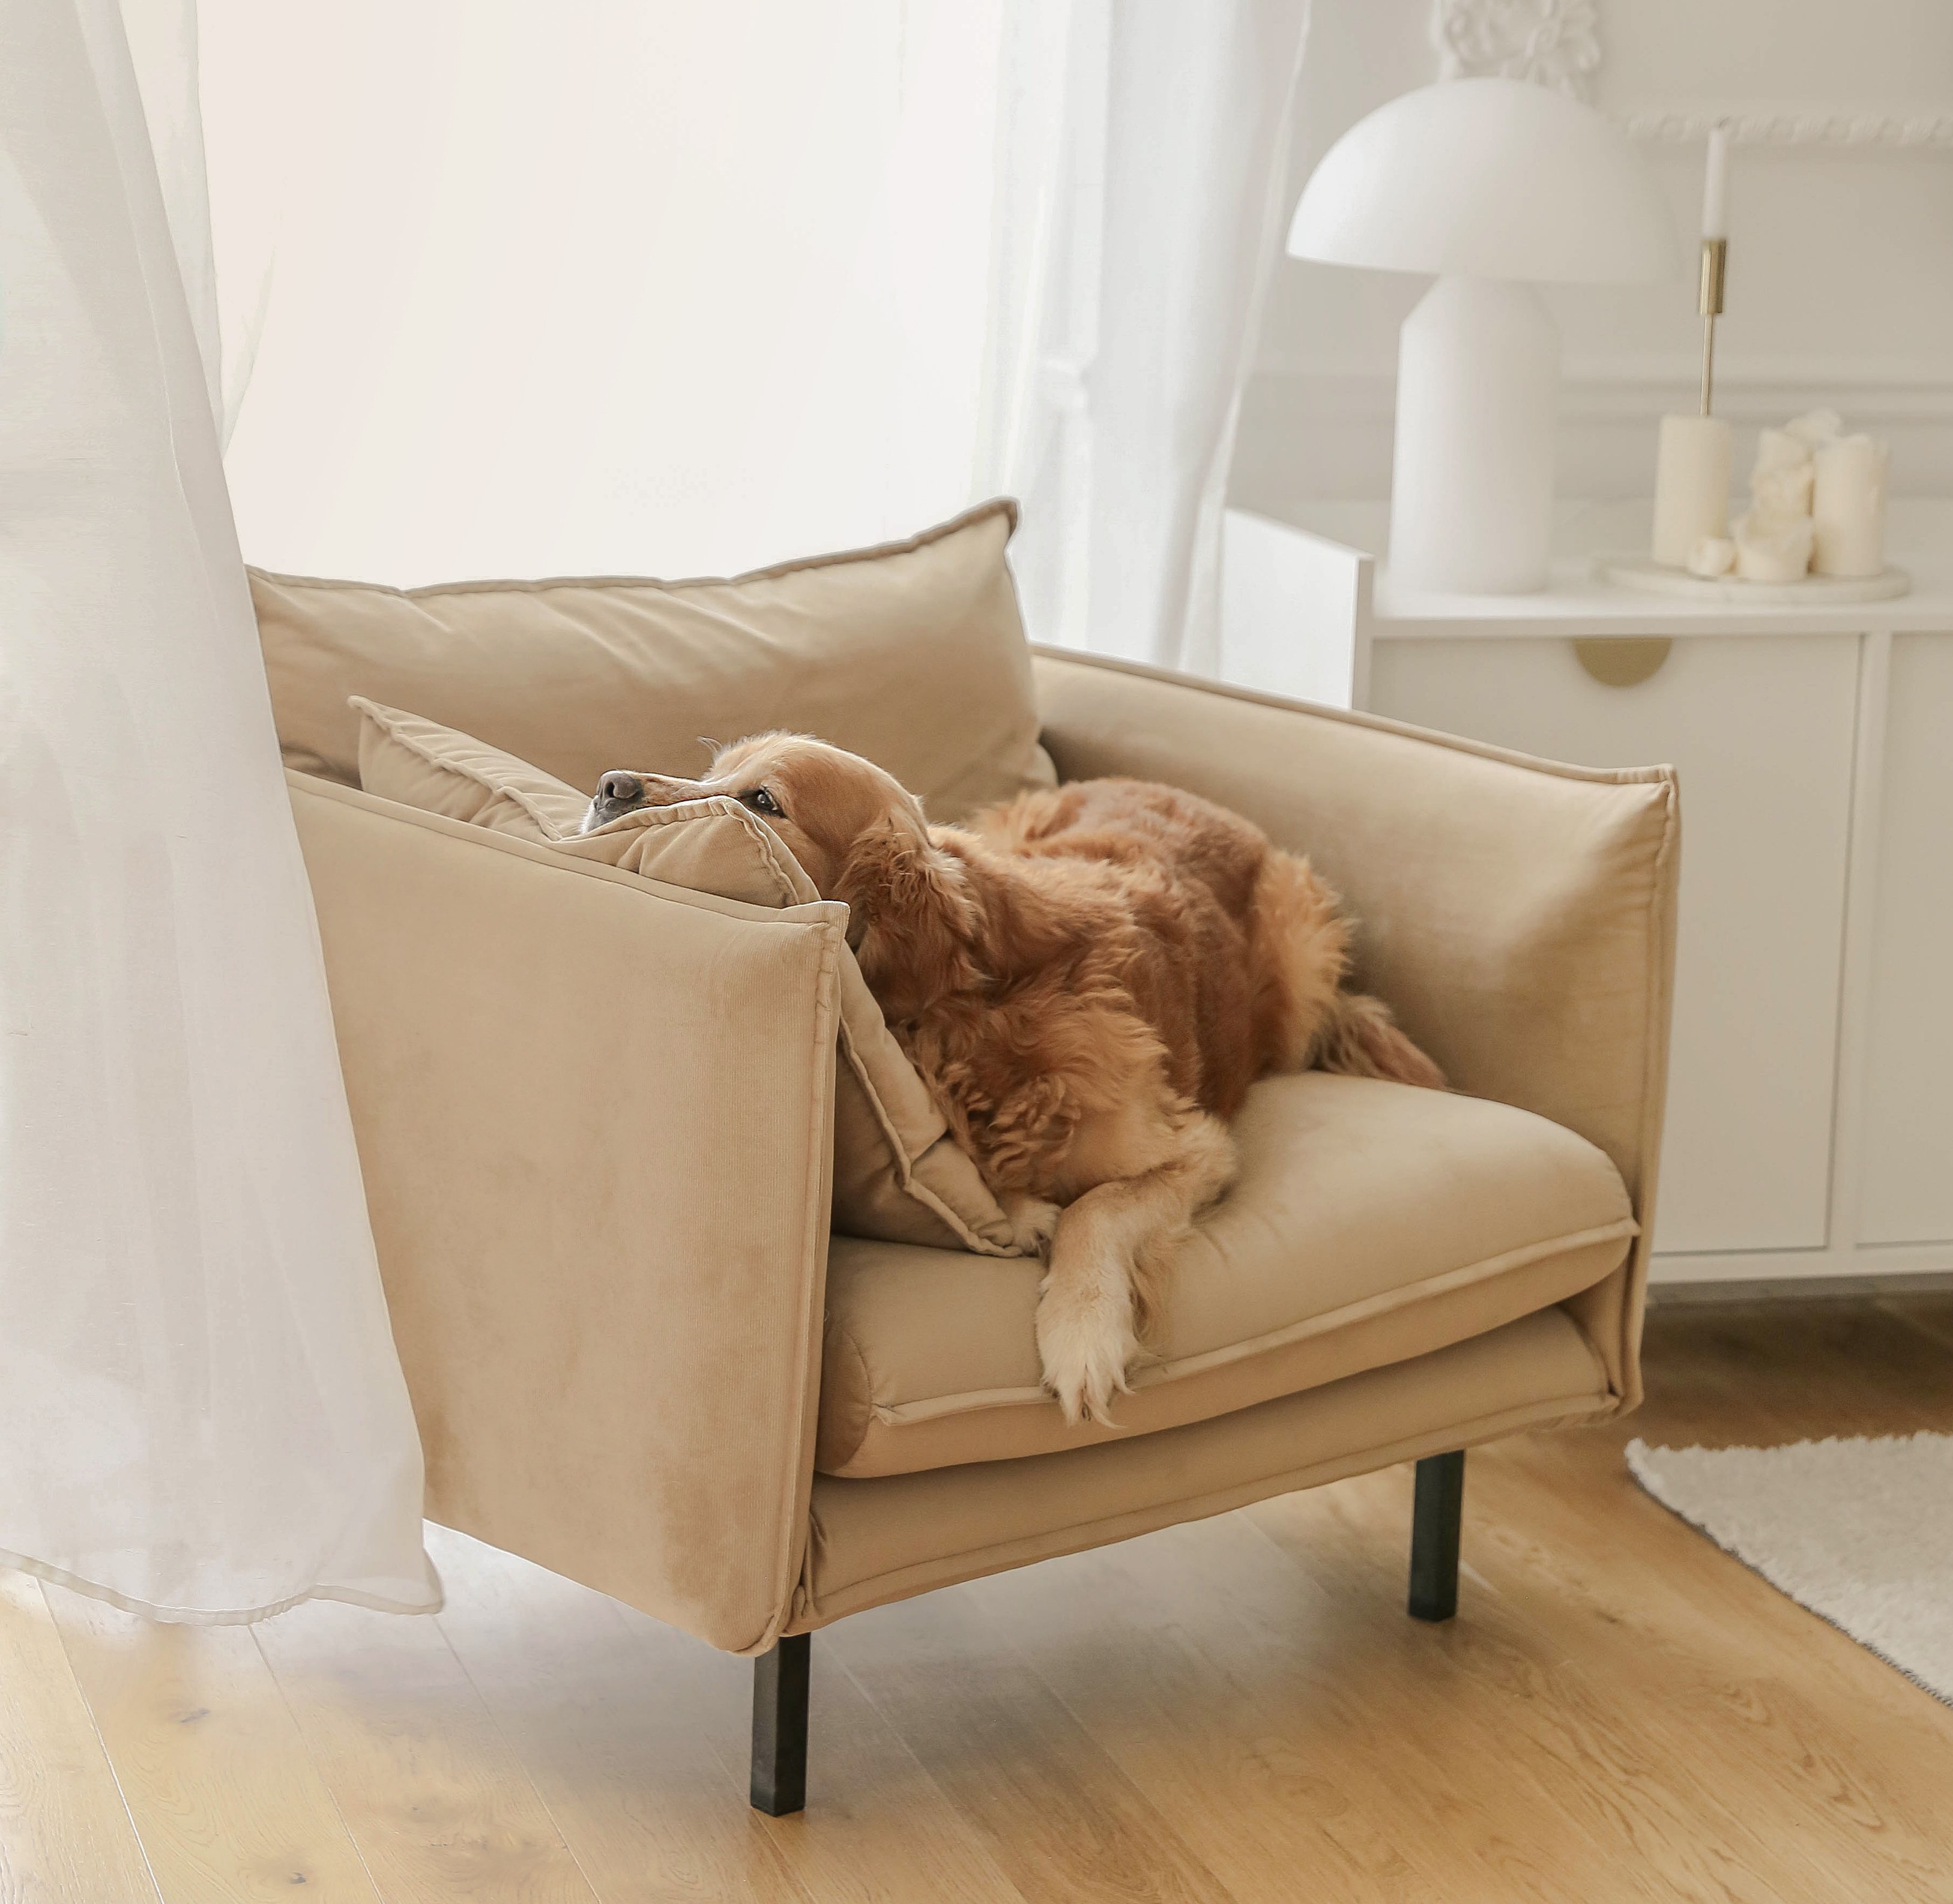 Light coloured furniture in your interior - it can work - even with children and pets!